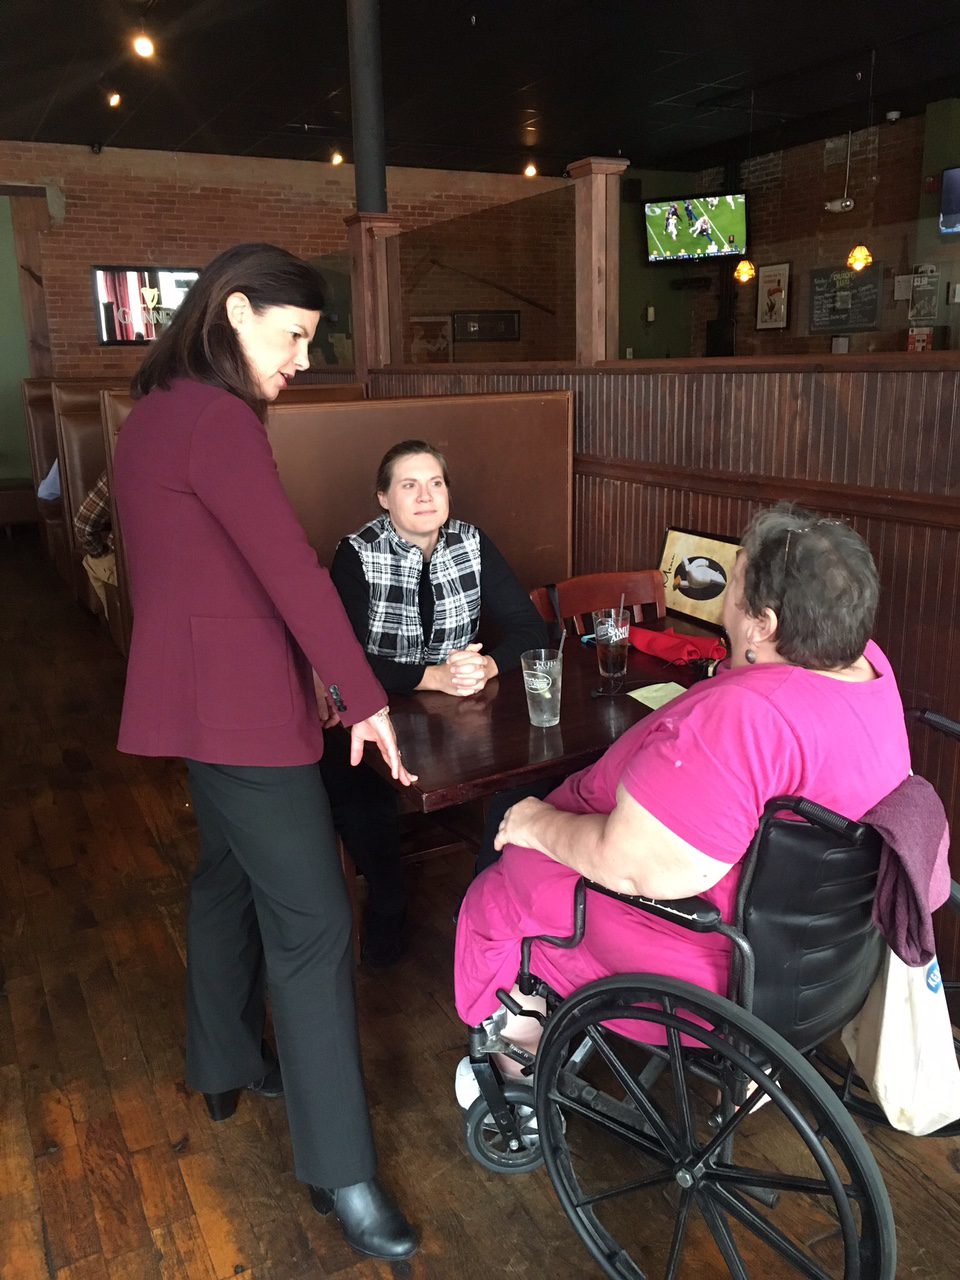 Sen. Kelly Ayotte speaking with Bread for the World members at a popular eatery in Claremont, N.H.